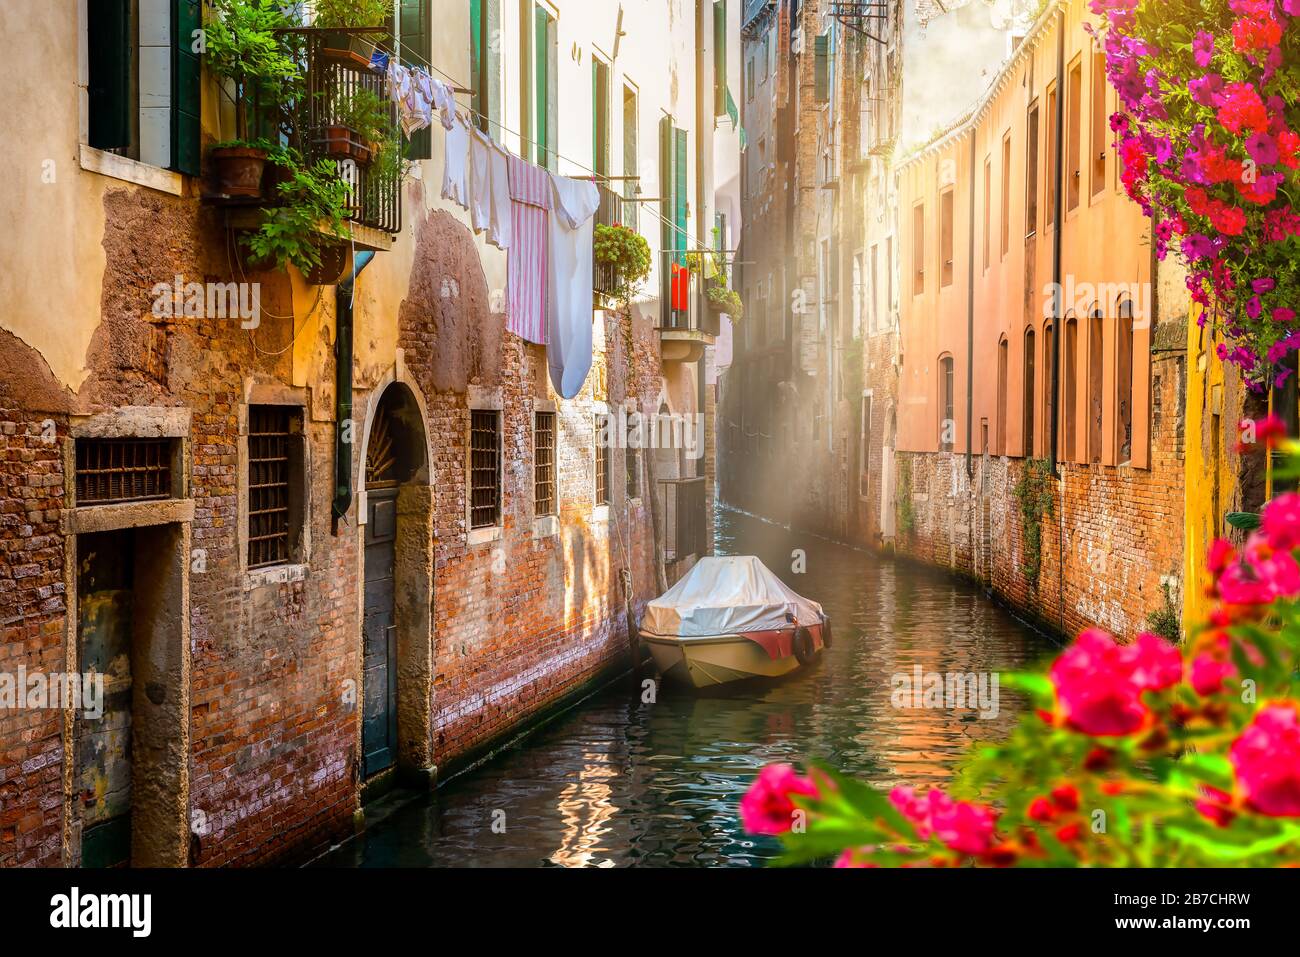 Flowers on a canal in Venice, Italy Stock Photo